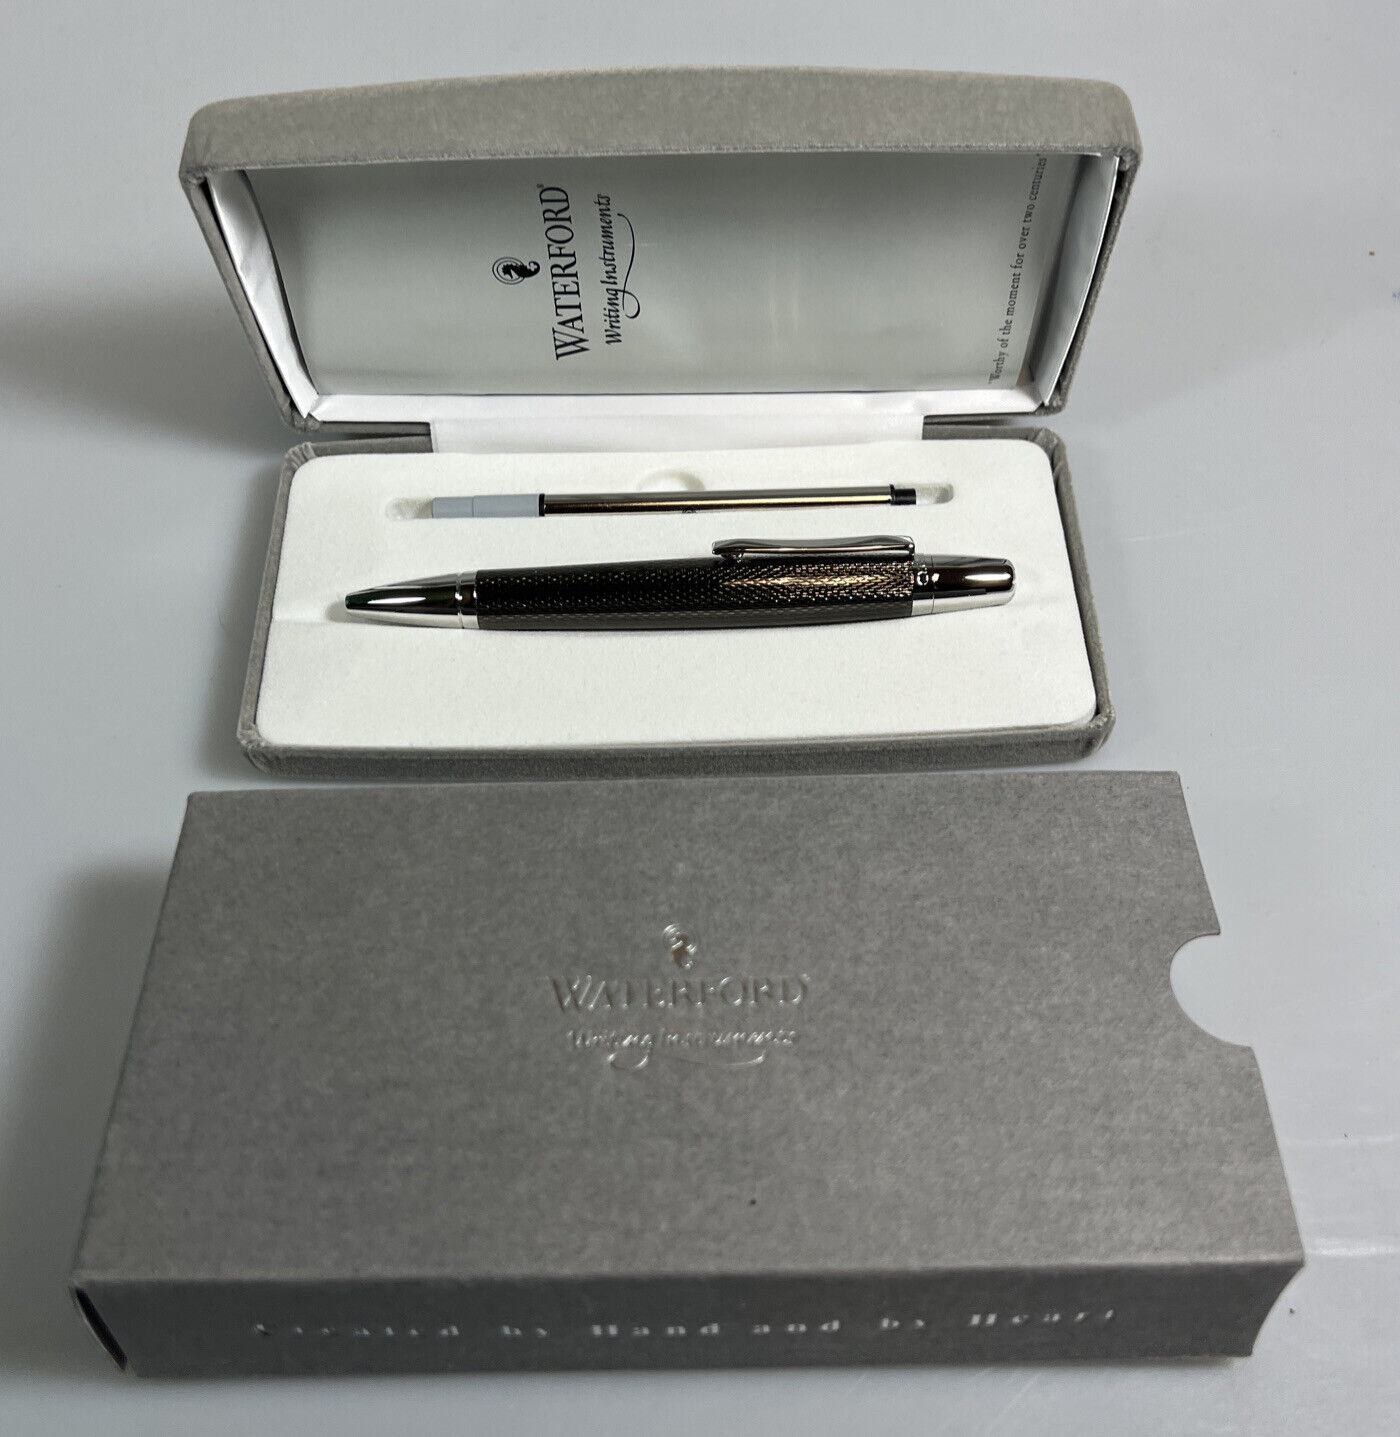 Waterford Writing Instruments Ballpoint Pen Black Silver W Booklet Superb